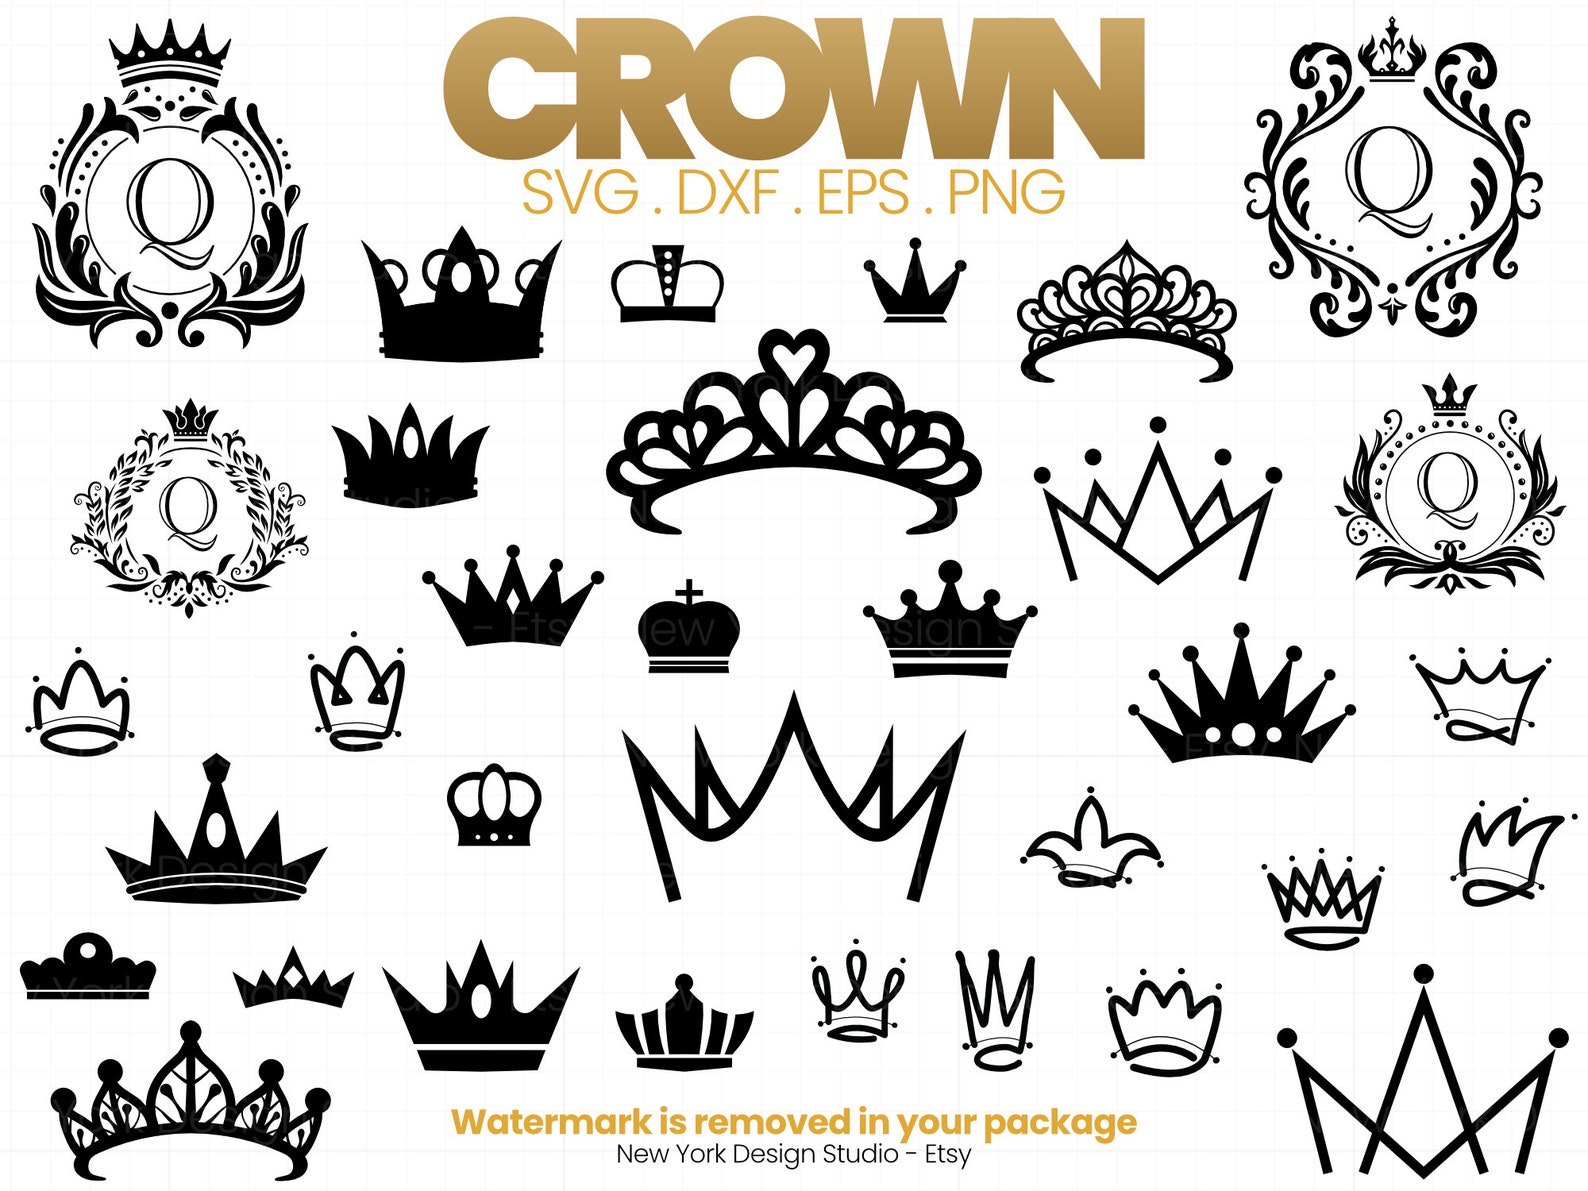 Nice crowns for your collection.